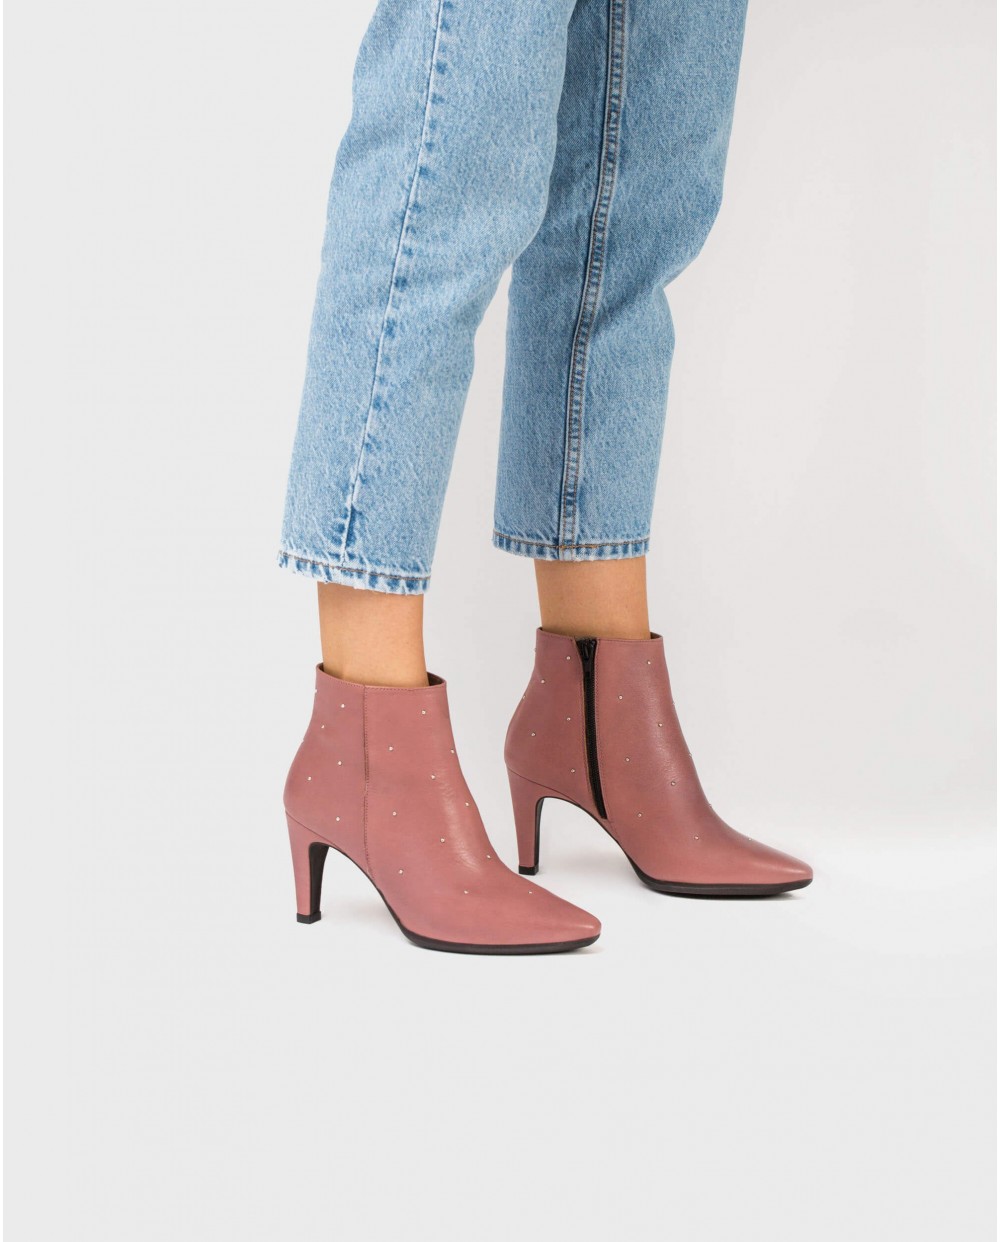 Wonders-Outlet-Ankle boot with metallic details